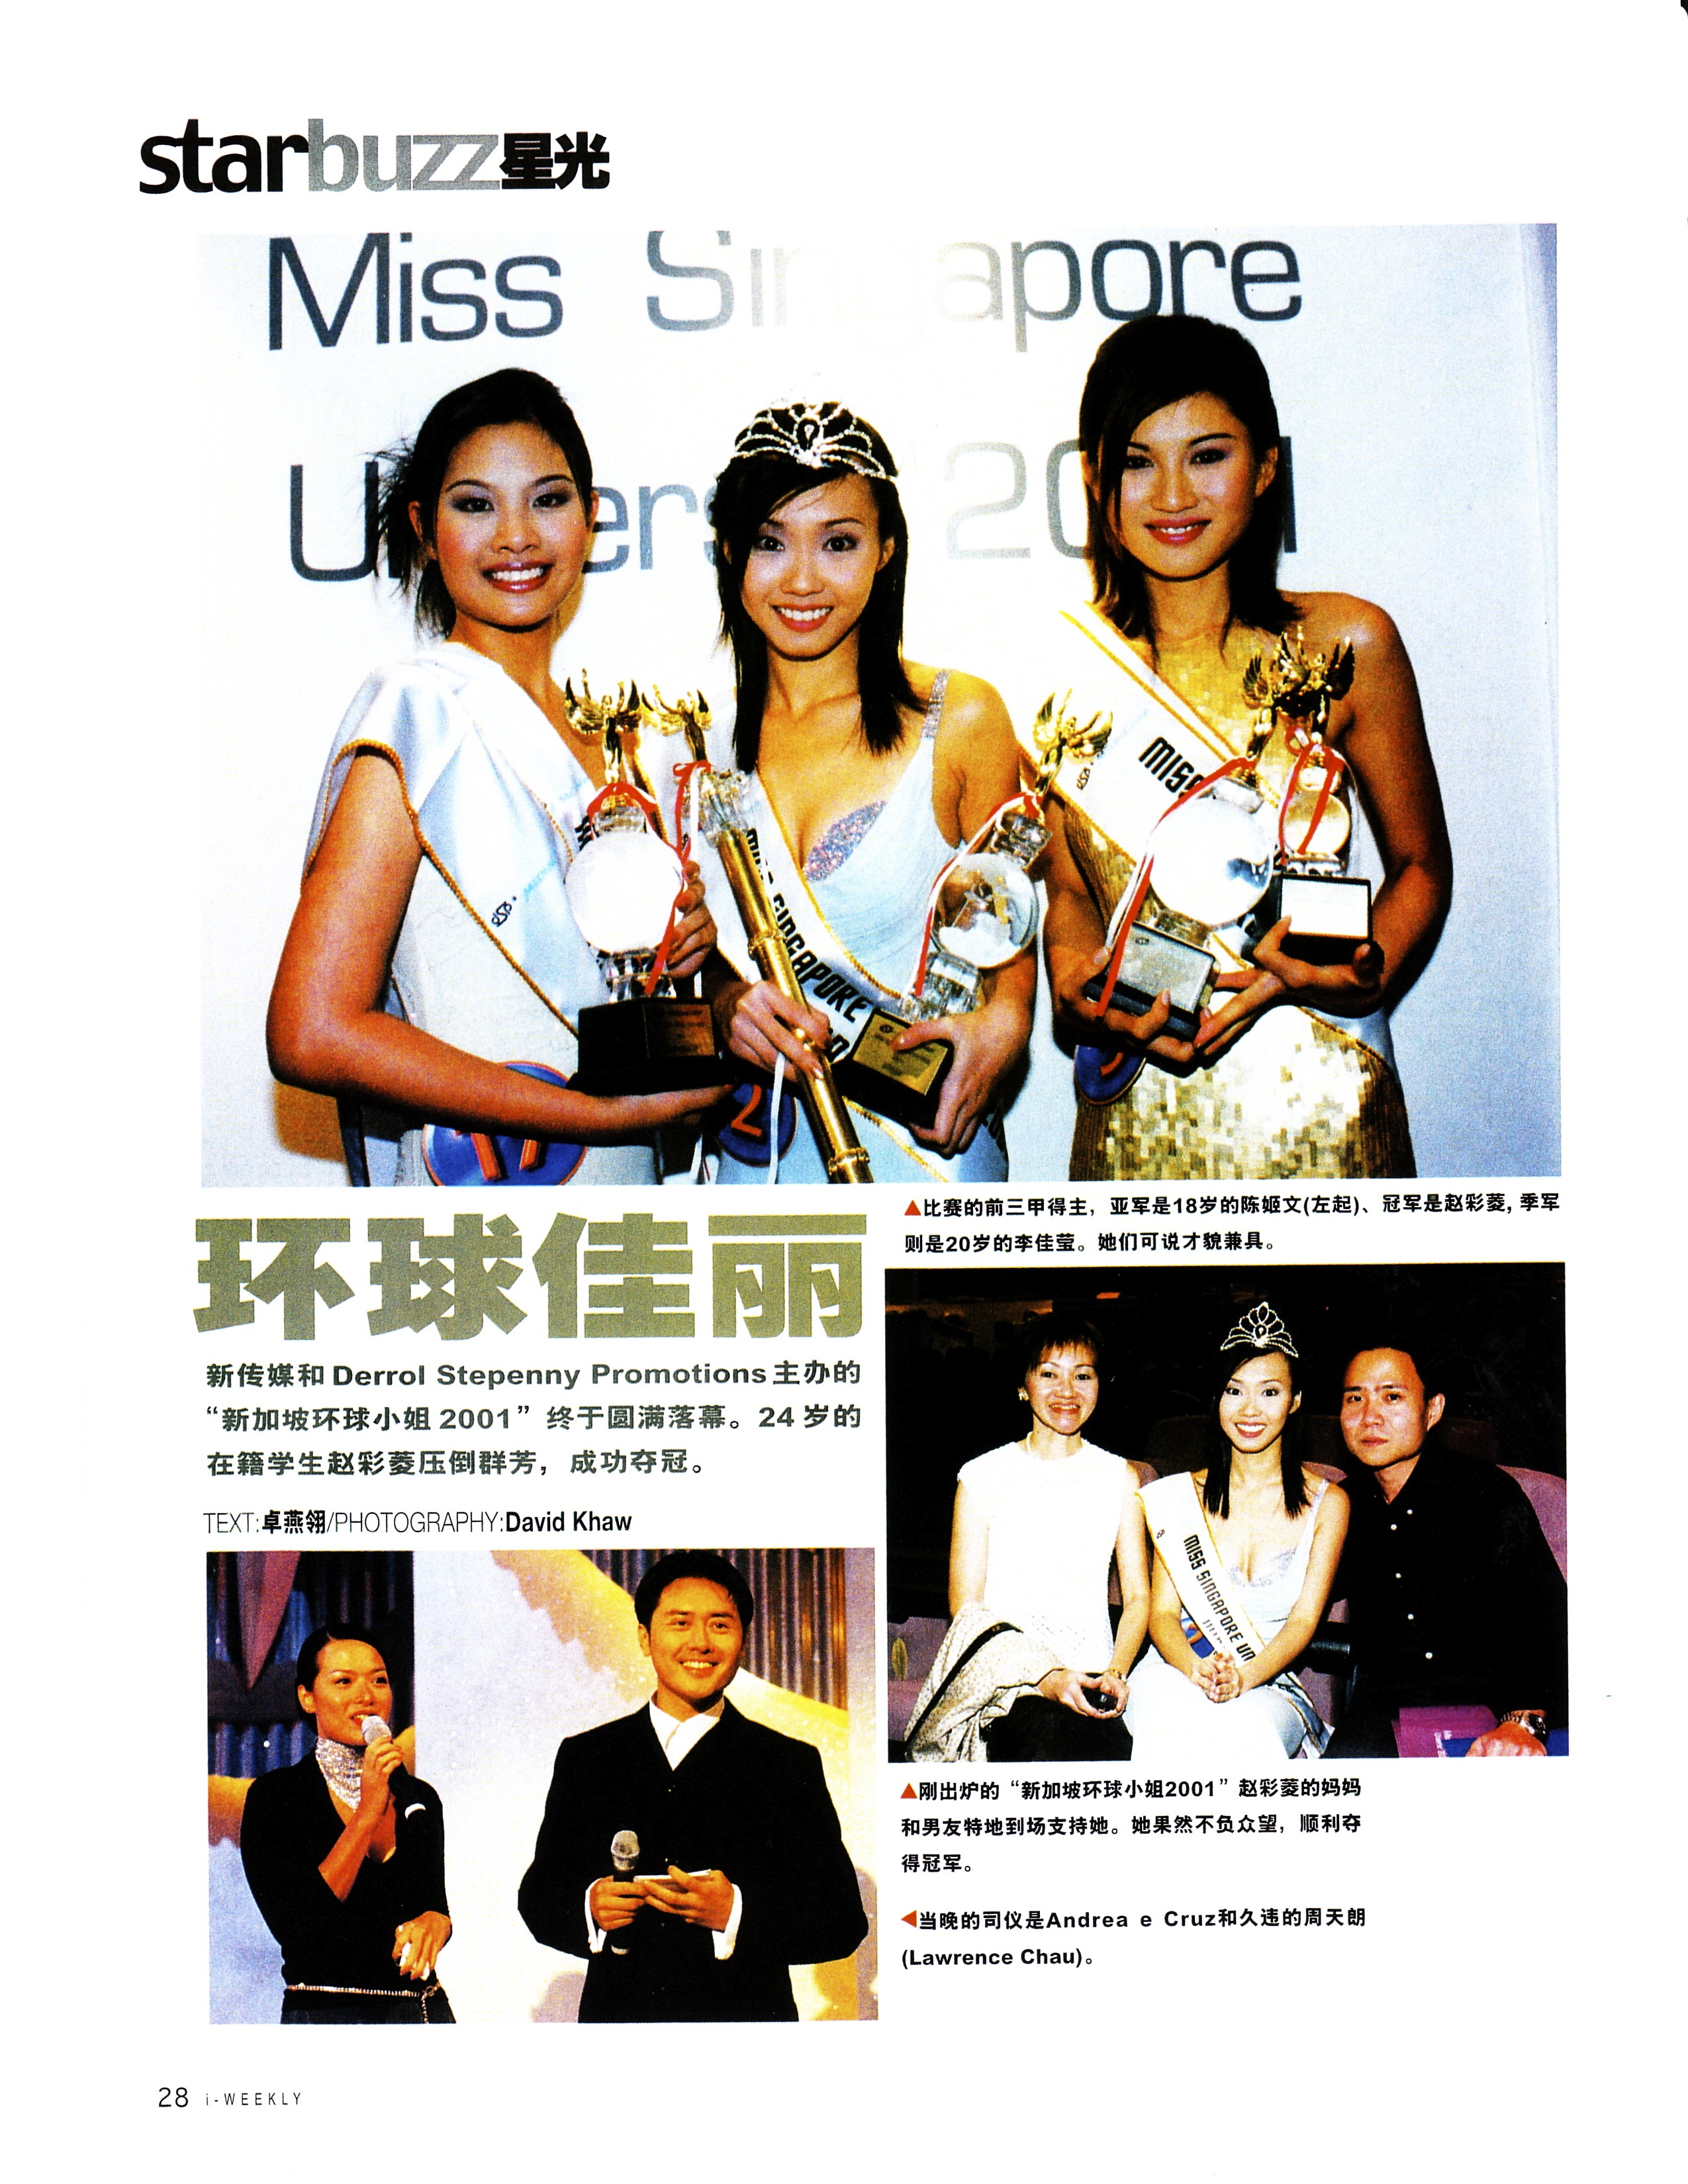 Hosting the first ever televised Miss Singapore Universe pageant.